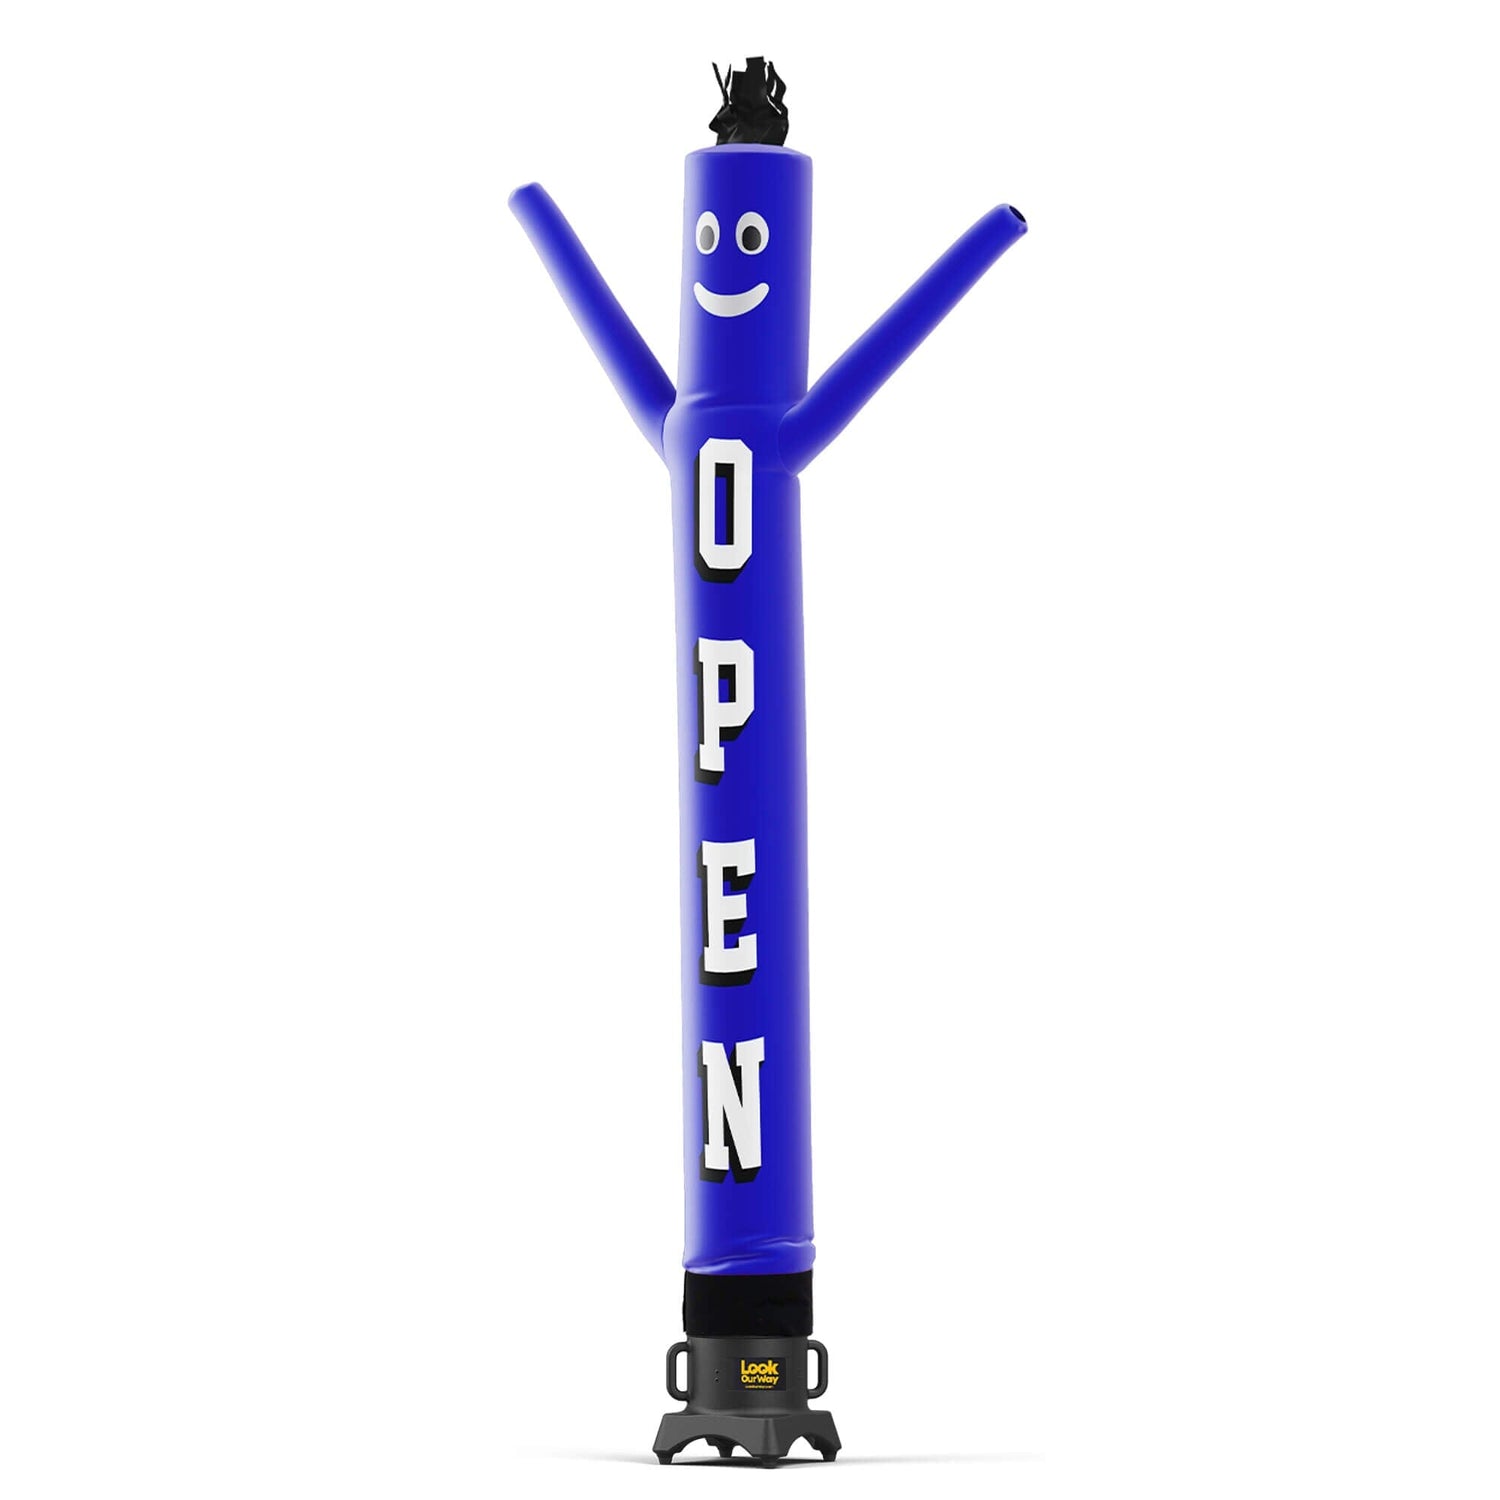 Open Air Dancers® Inflatable Tube Man 10M0120055